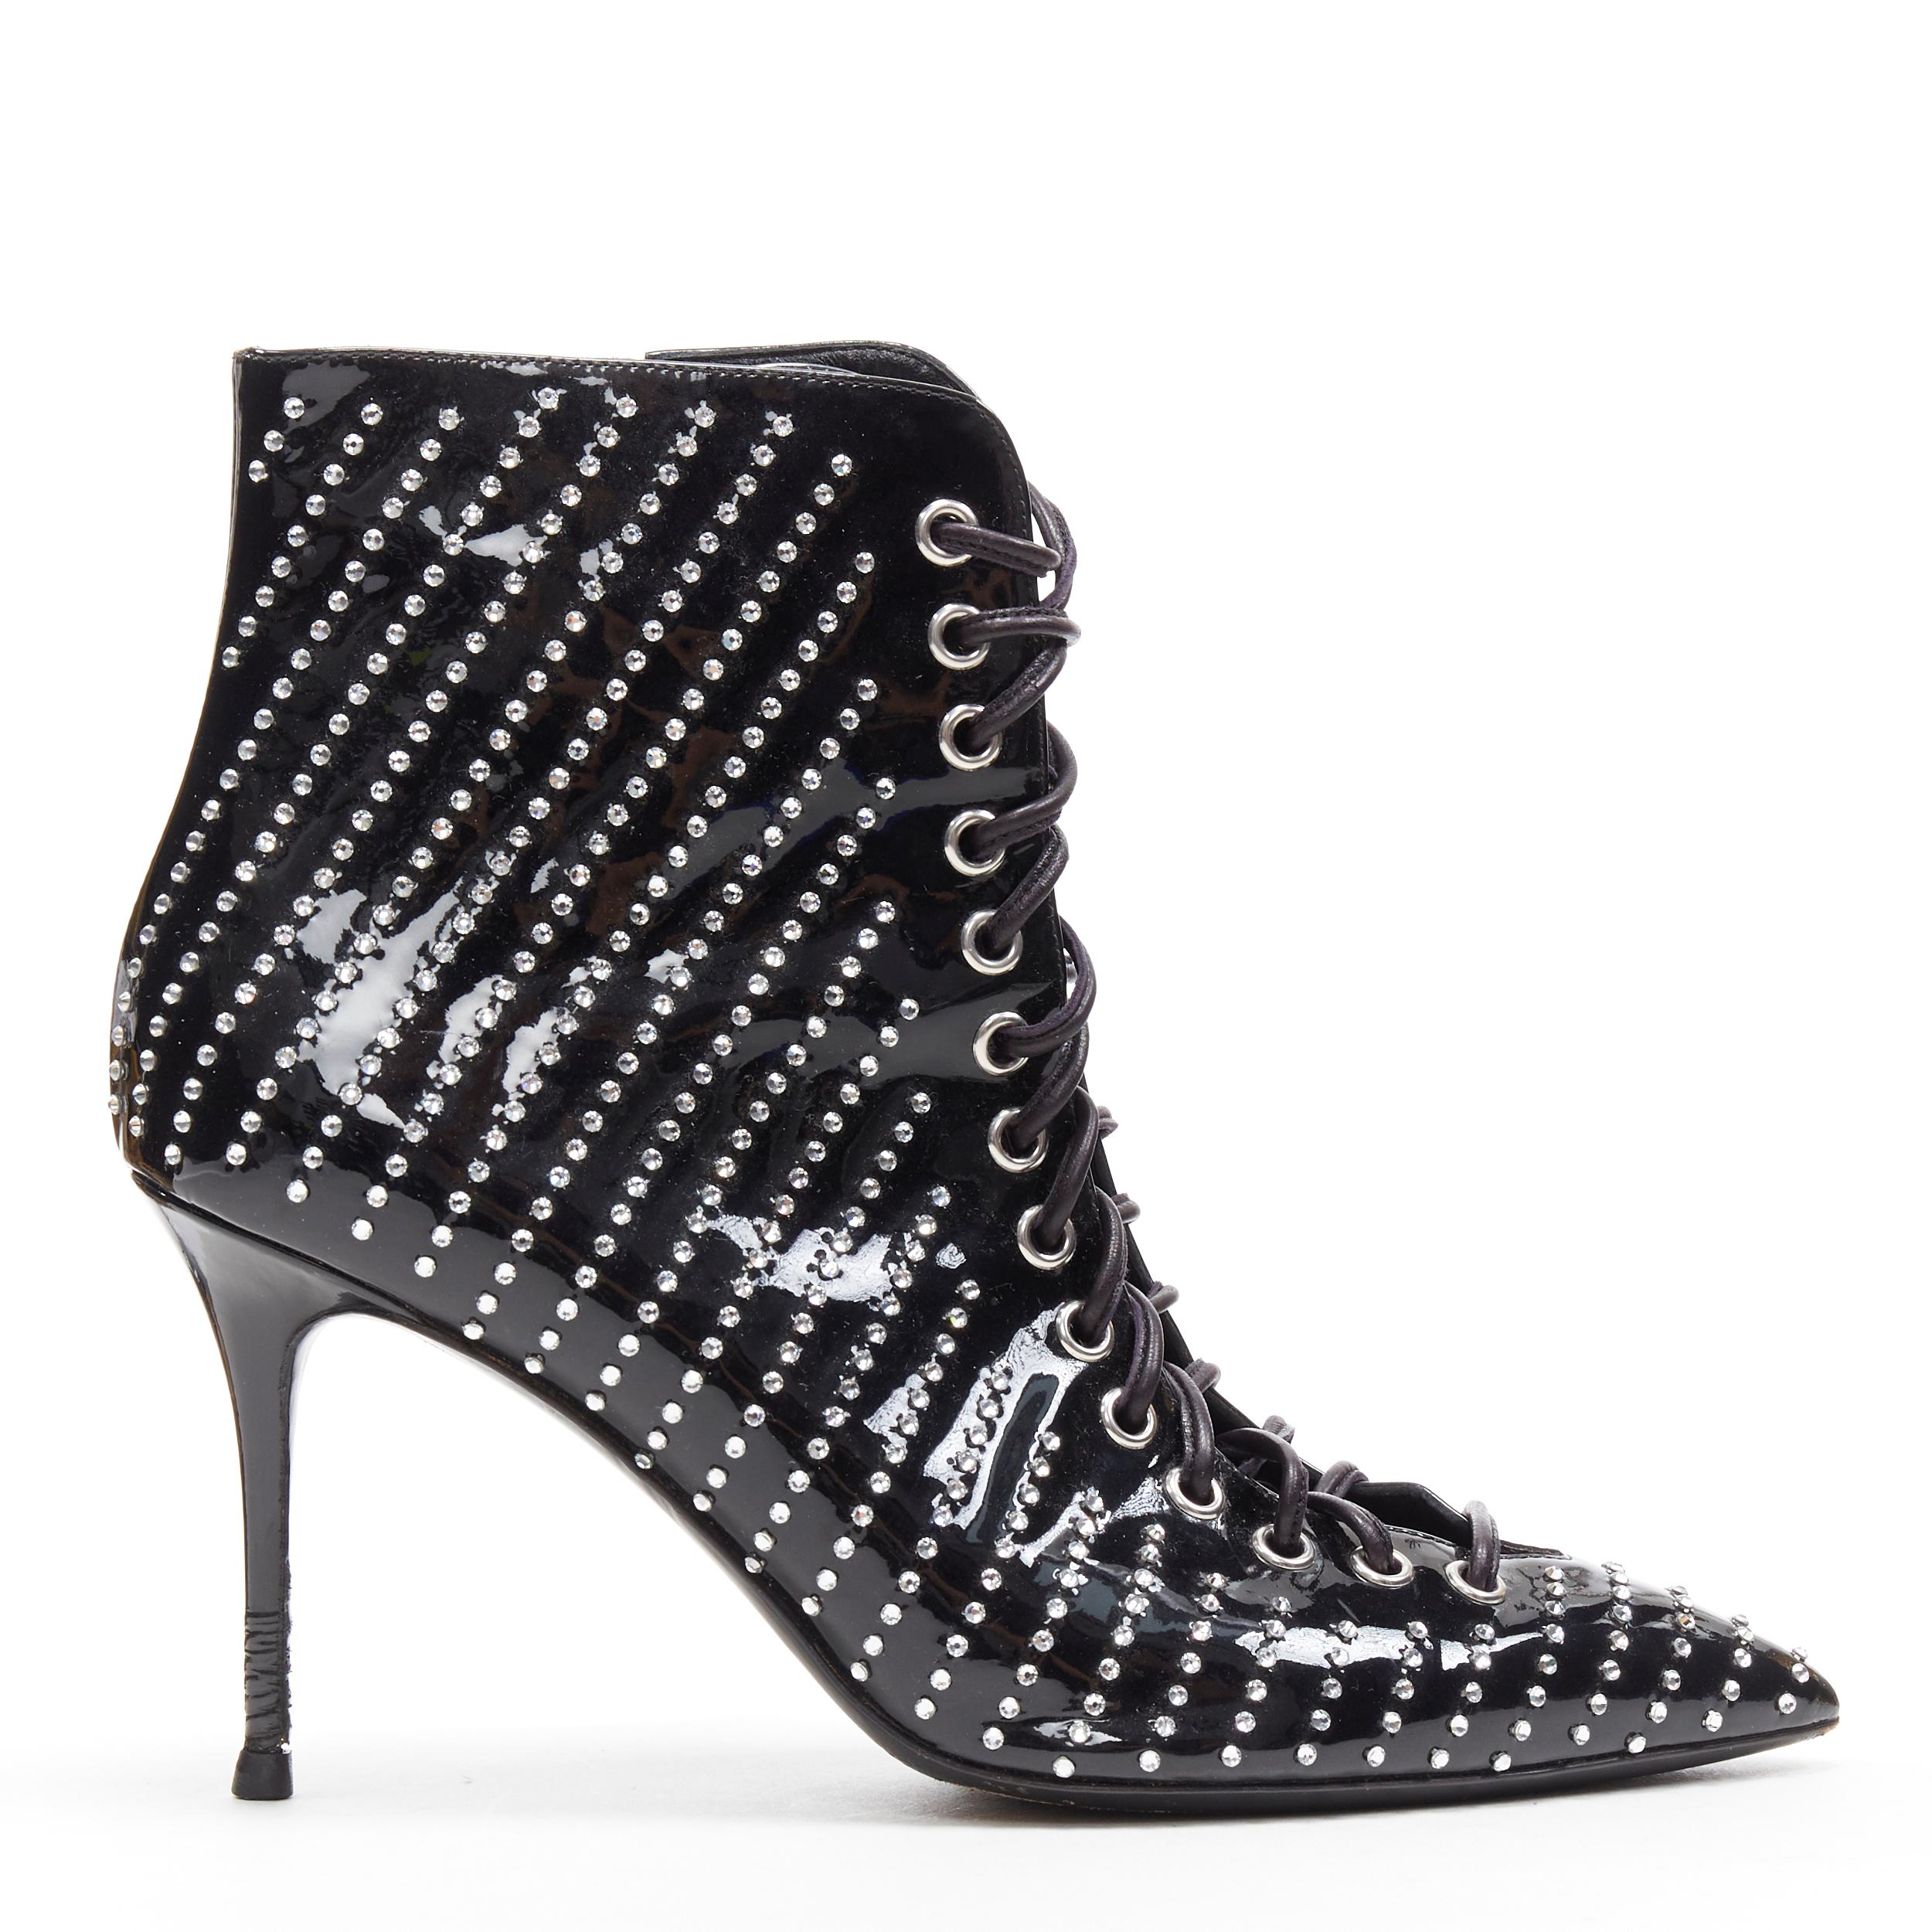 GIUSEPPE ZANOTTI Lucrezia black patent crystal embellished  lace up bootie EU39
Brand: Giuseppe Zanotti
Model Name / Style: Lucrezia
Material: Patent leather
Color: Black
Pattern: Solid
Closure: Zip
Extra Detail: High (3-3.9 in) heel height. Pointed